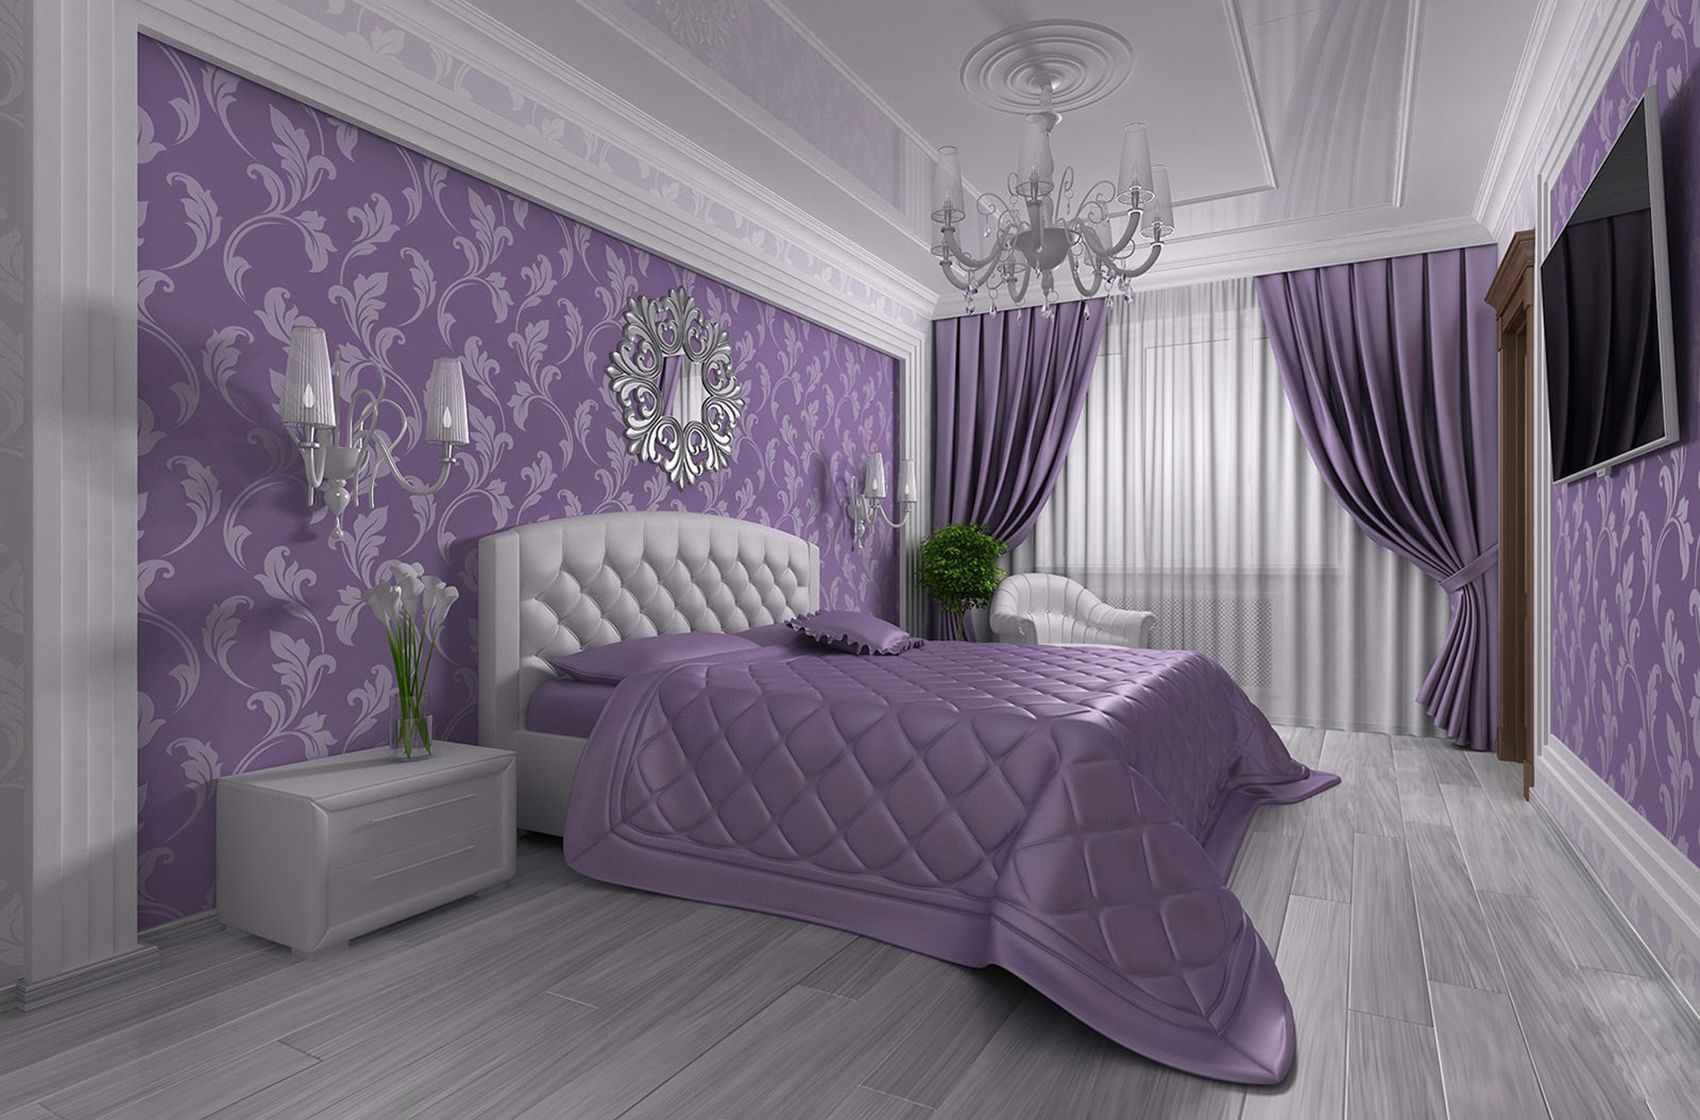 an example of a beautiful bedroom style